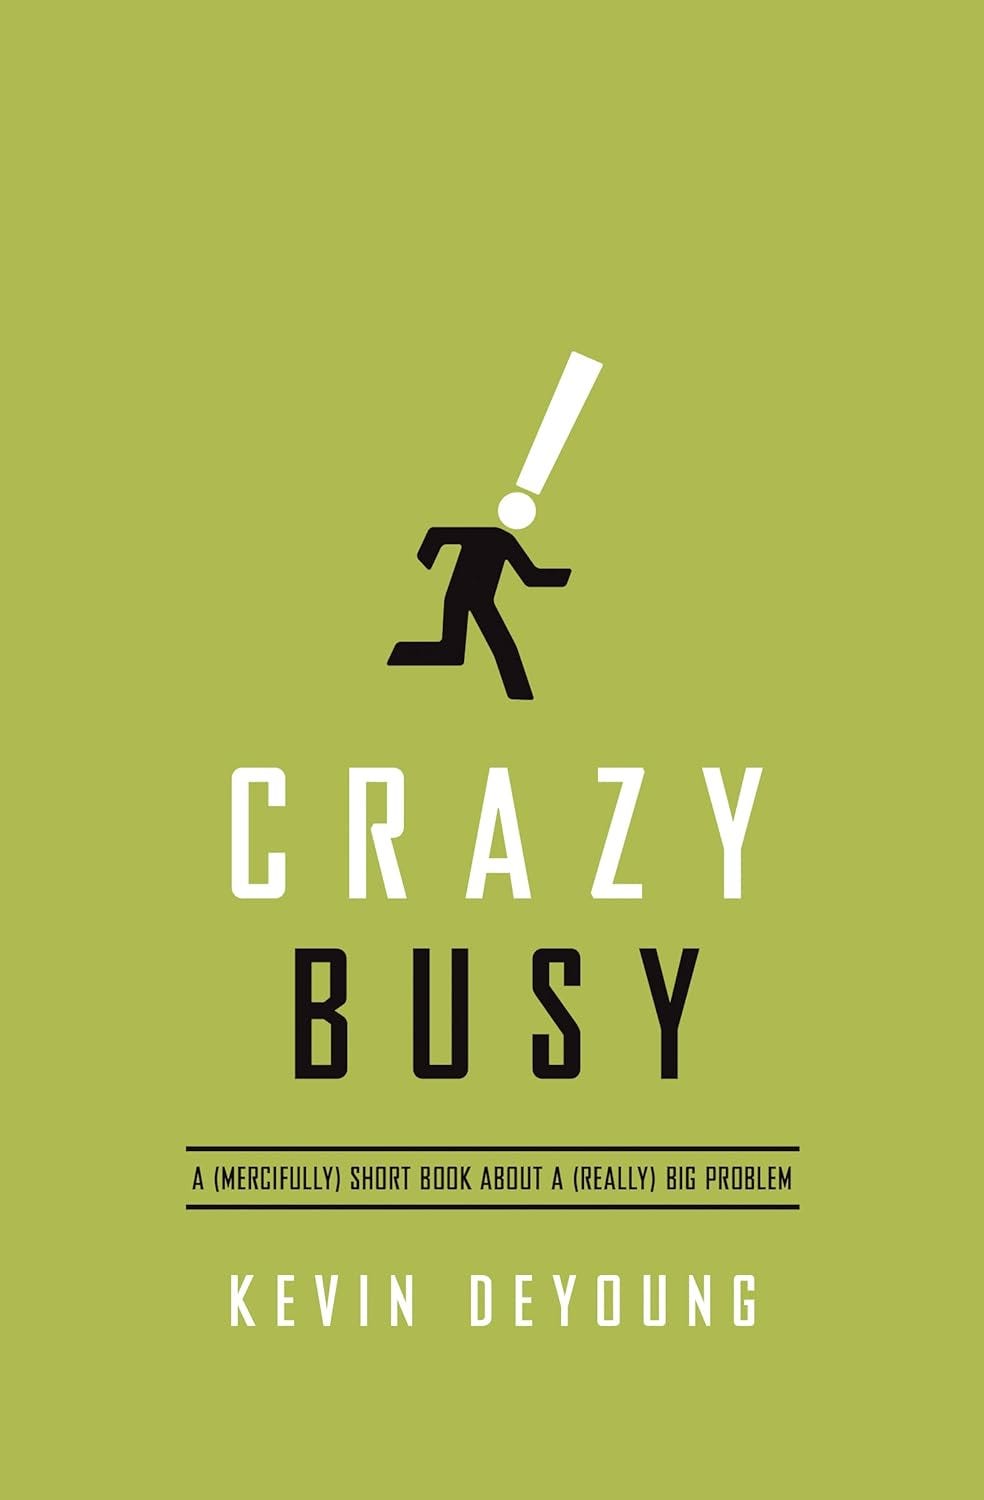 Image of a book cover from Crazy Busy by Kevin DeYoung.